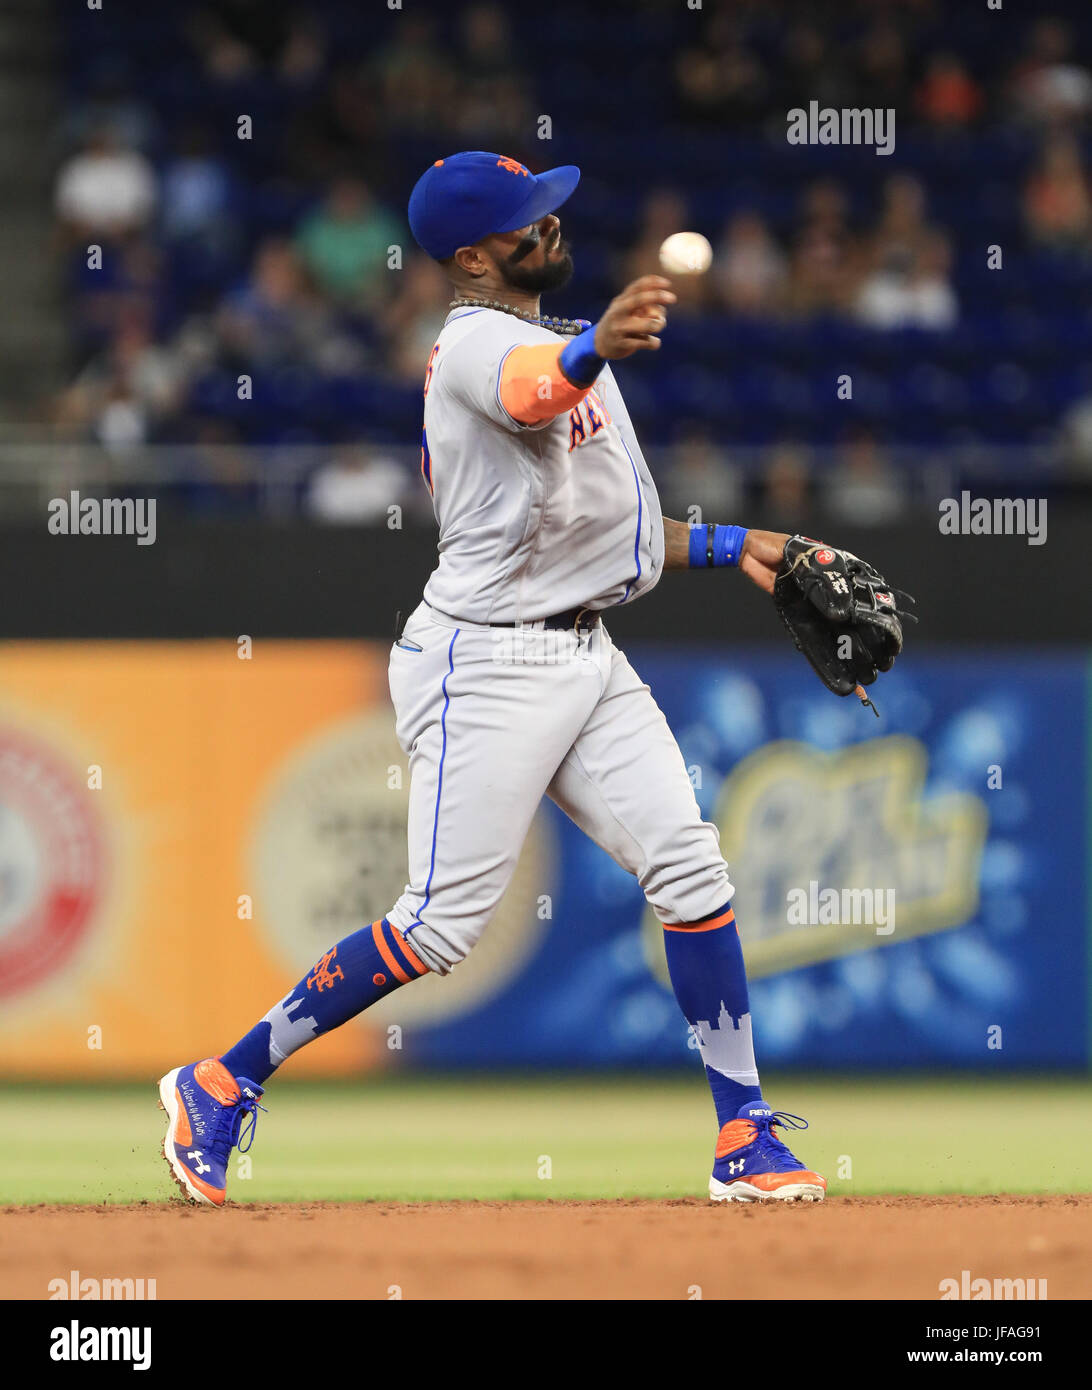 June 29, 2017: New York Mets shortstop Jose Reyes (7) throws a ball to first base in the fifth inning during a MLB game between the New York Mets and the Miami Marlins at the Marlins Park, in Miami, Florida. The Mets won 6-3. Mario Houben/CSM Stock Photo